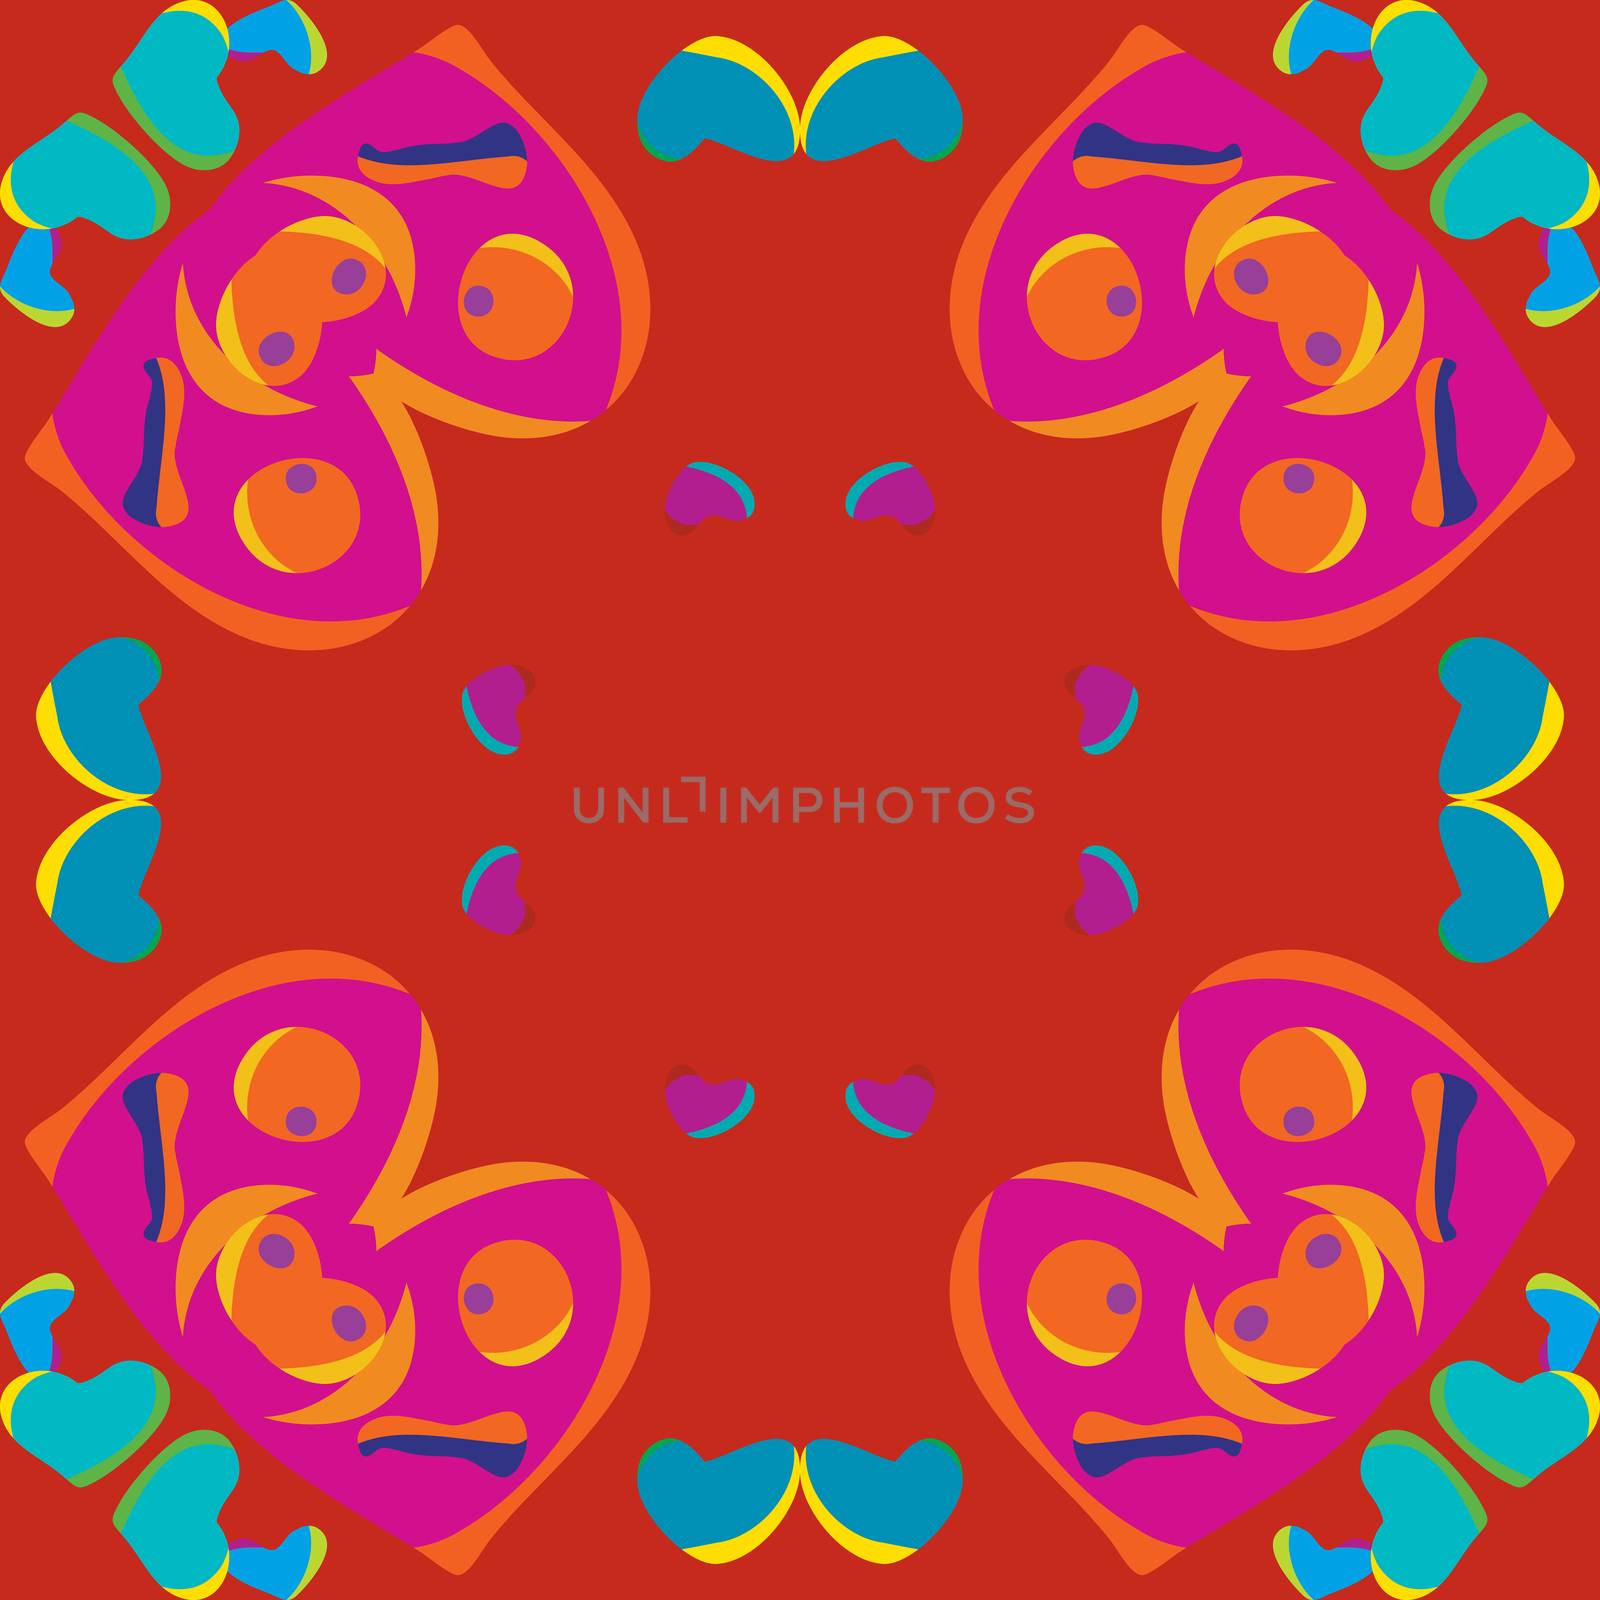 Seamless red tiles with abstract faces pattern